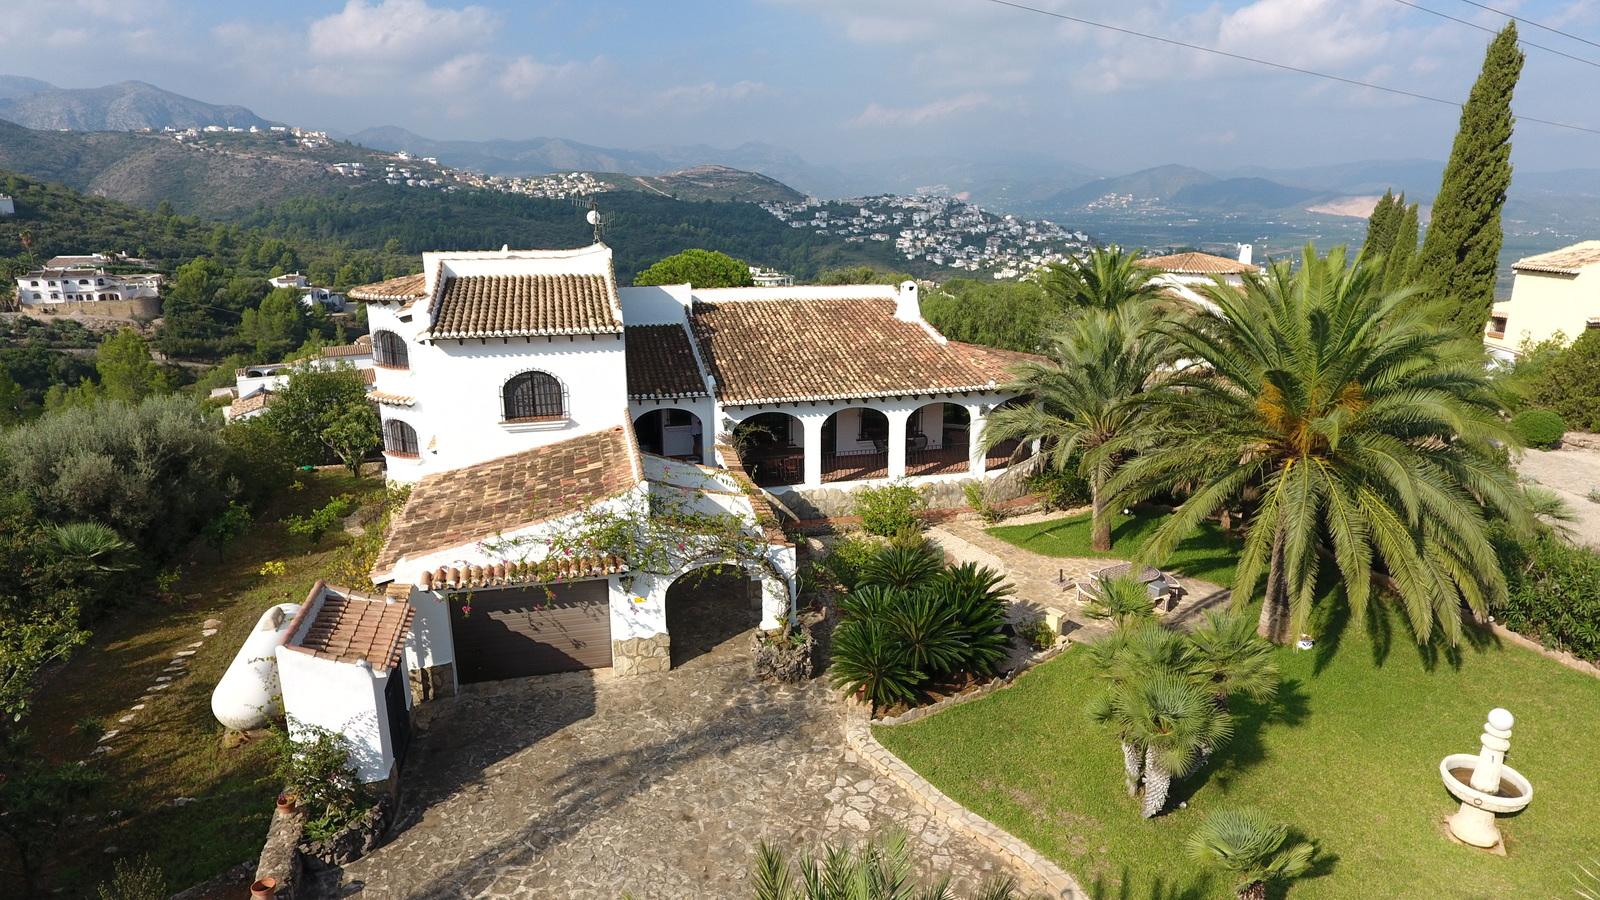 Villa with large plot and level access, magnificent views, large terraces, BBQ, central heating, air conditioning, garage and much more.